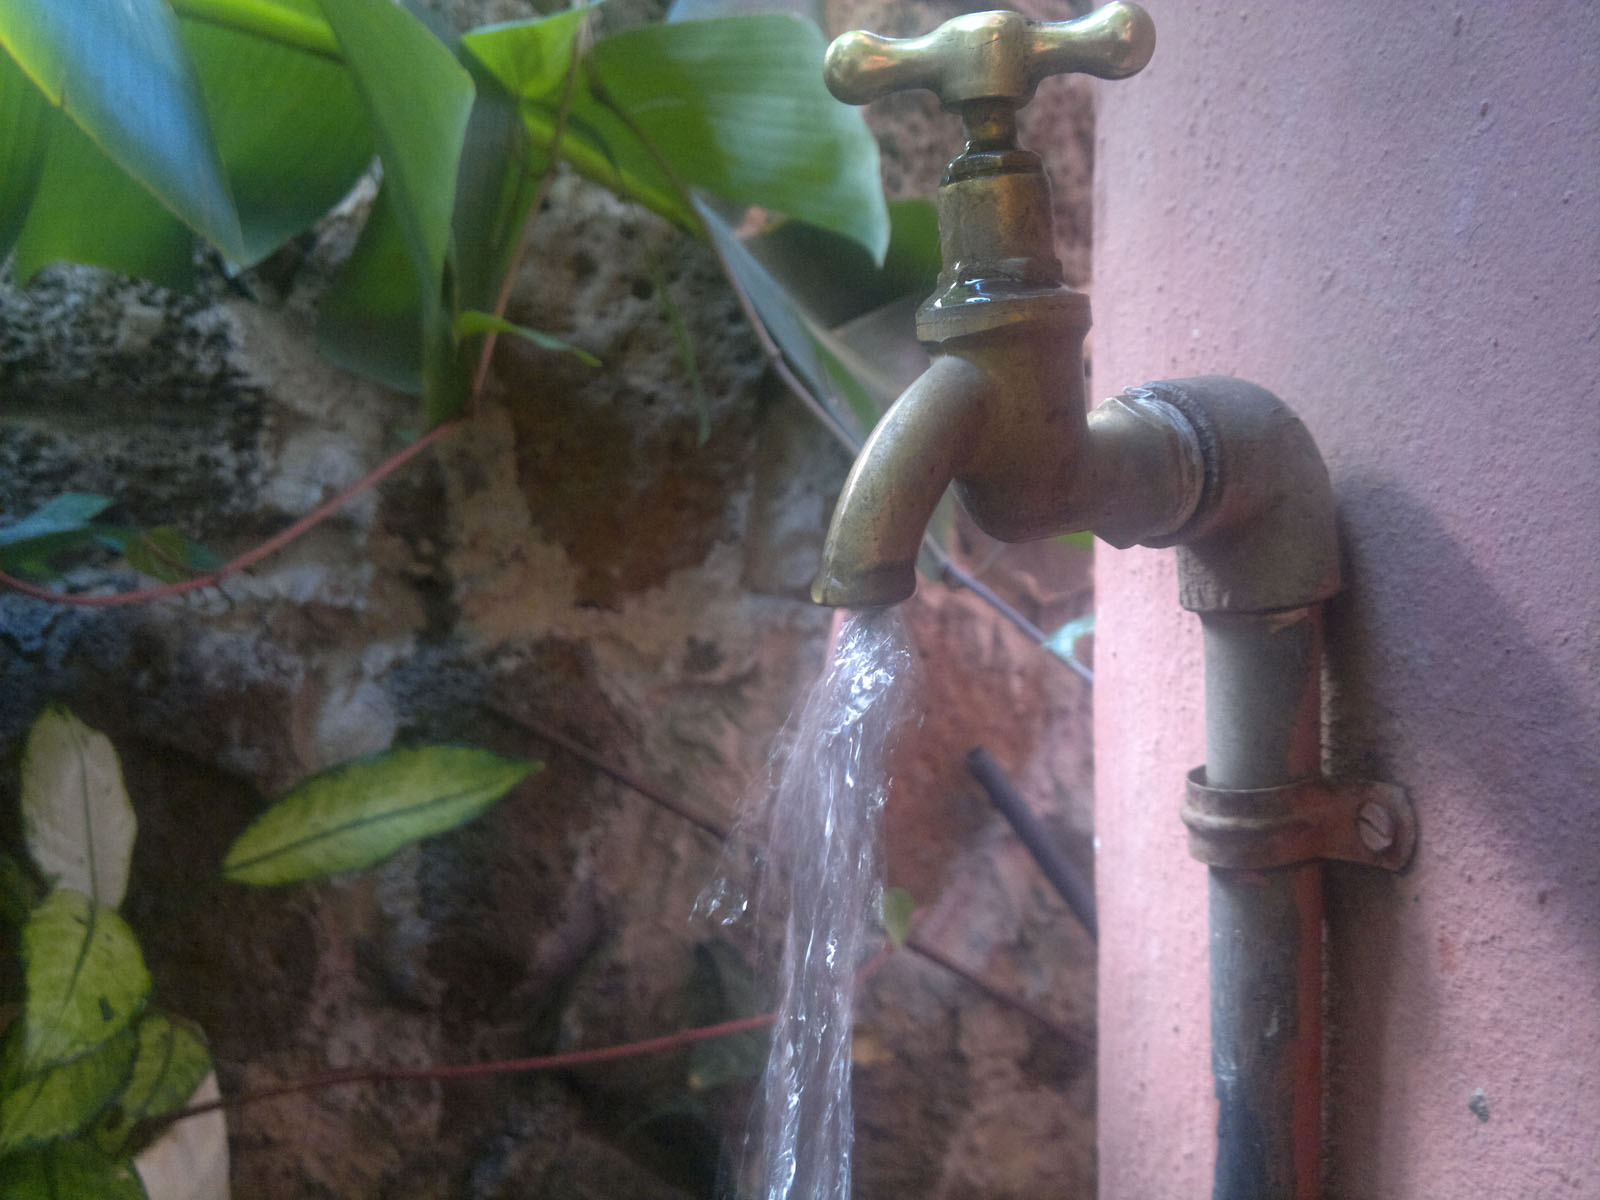 water is spouting from the pipe near the tree